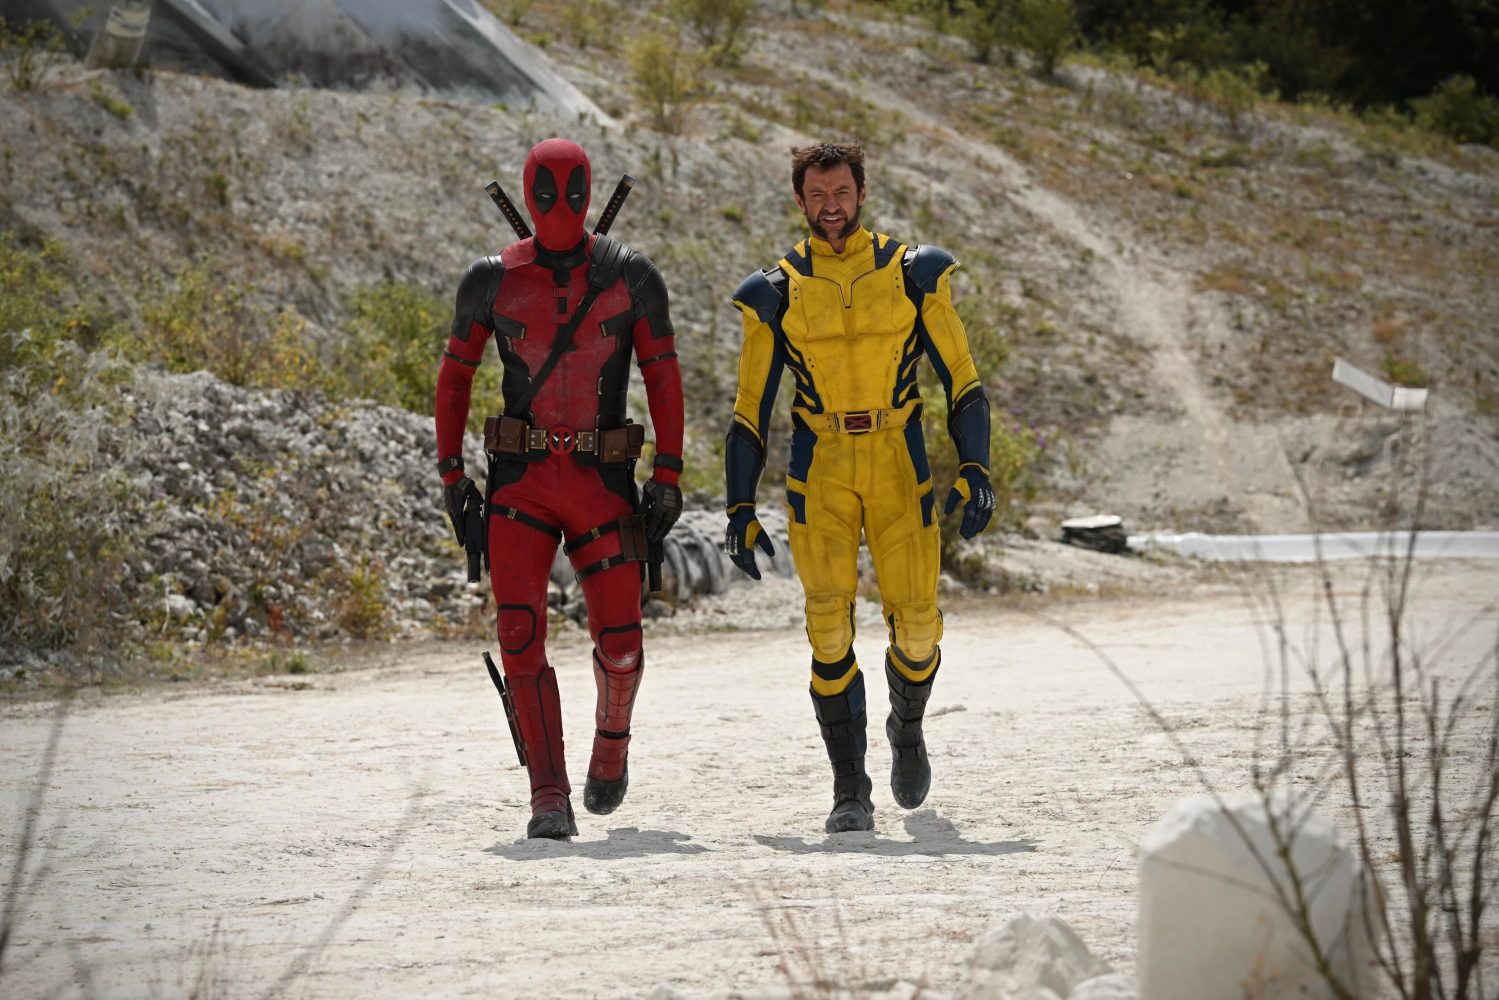 Deadpool & Wolverine will reportedly feature an amazing cameo I should
have seen coming